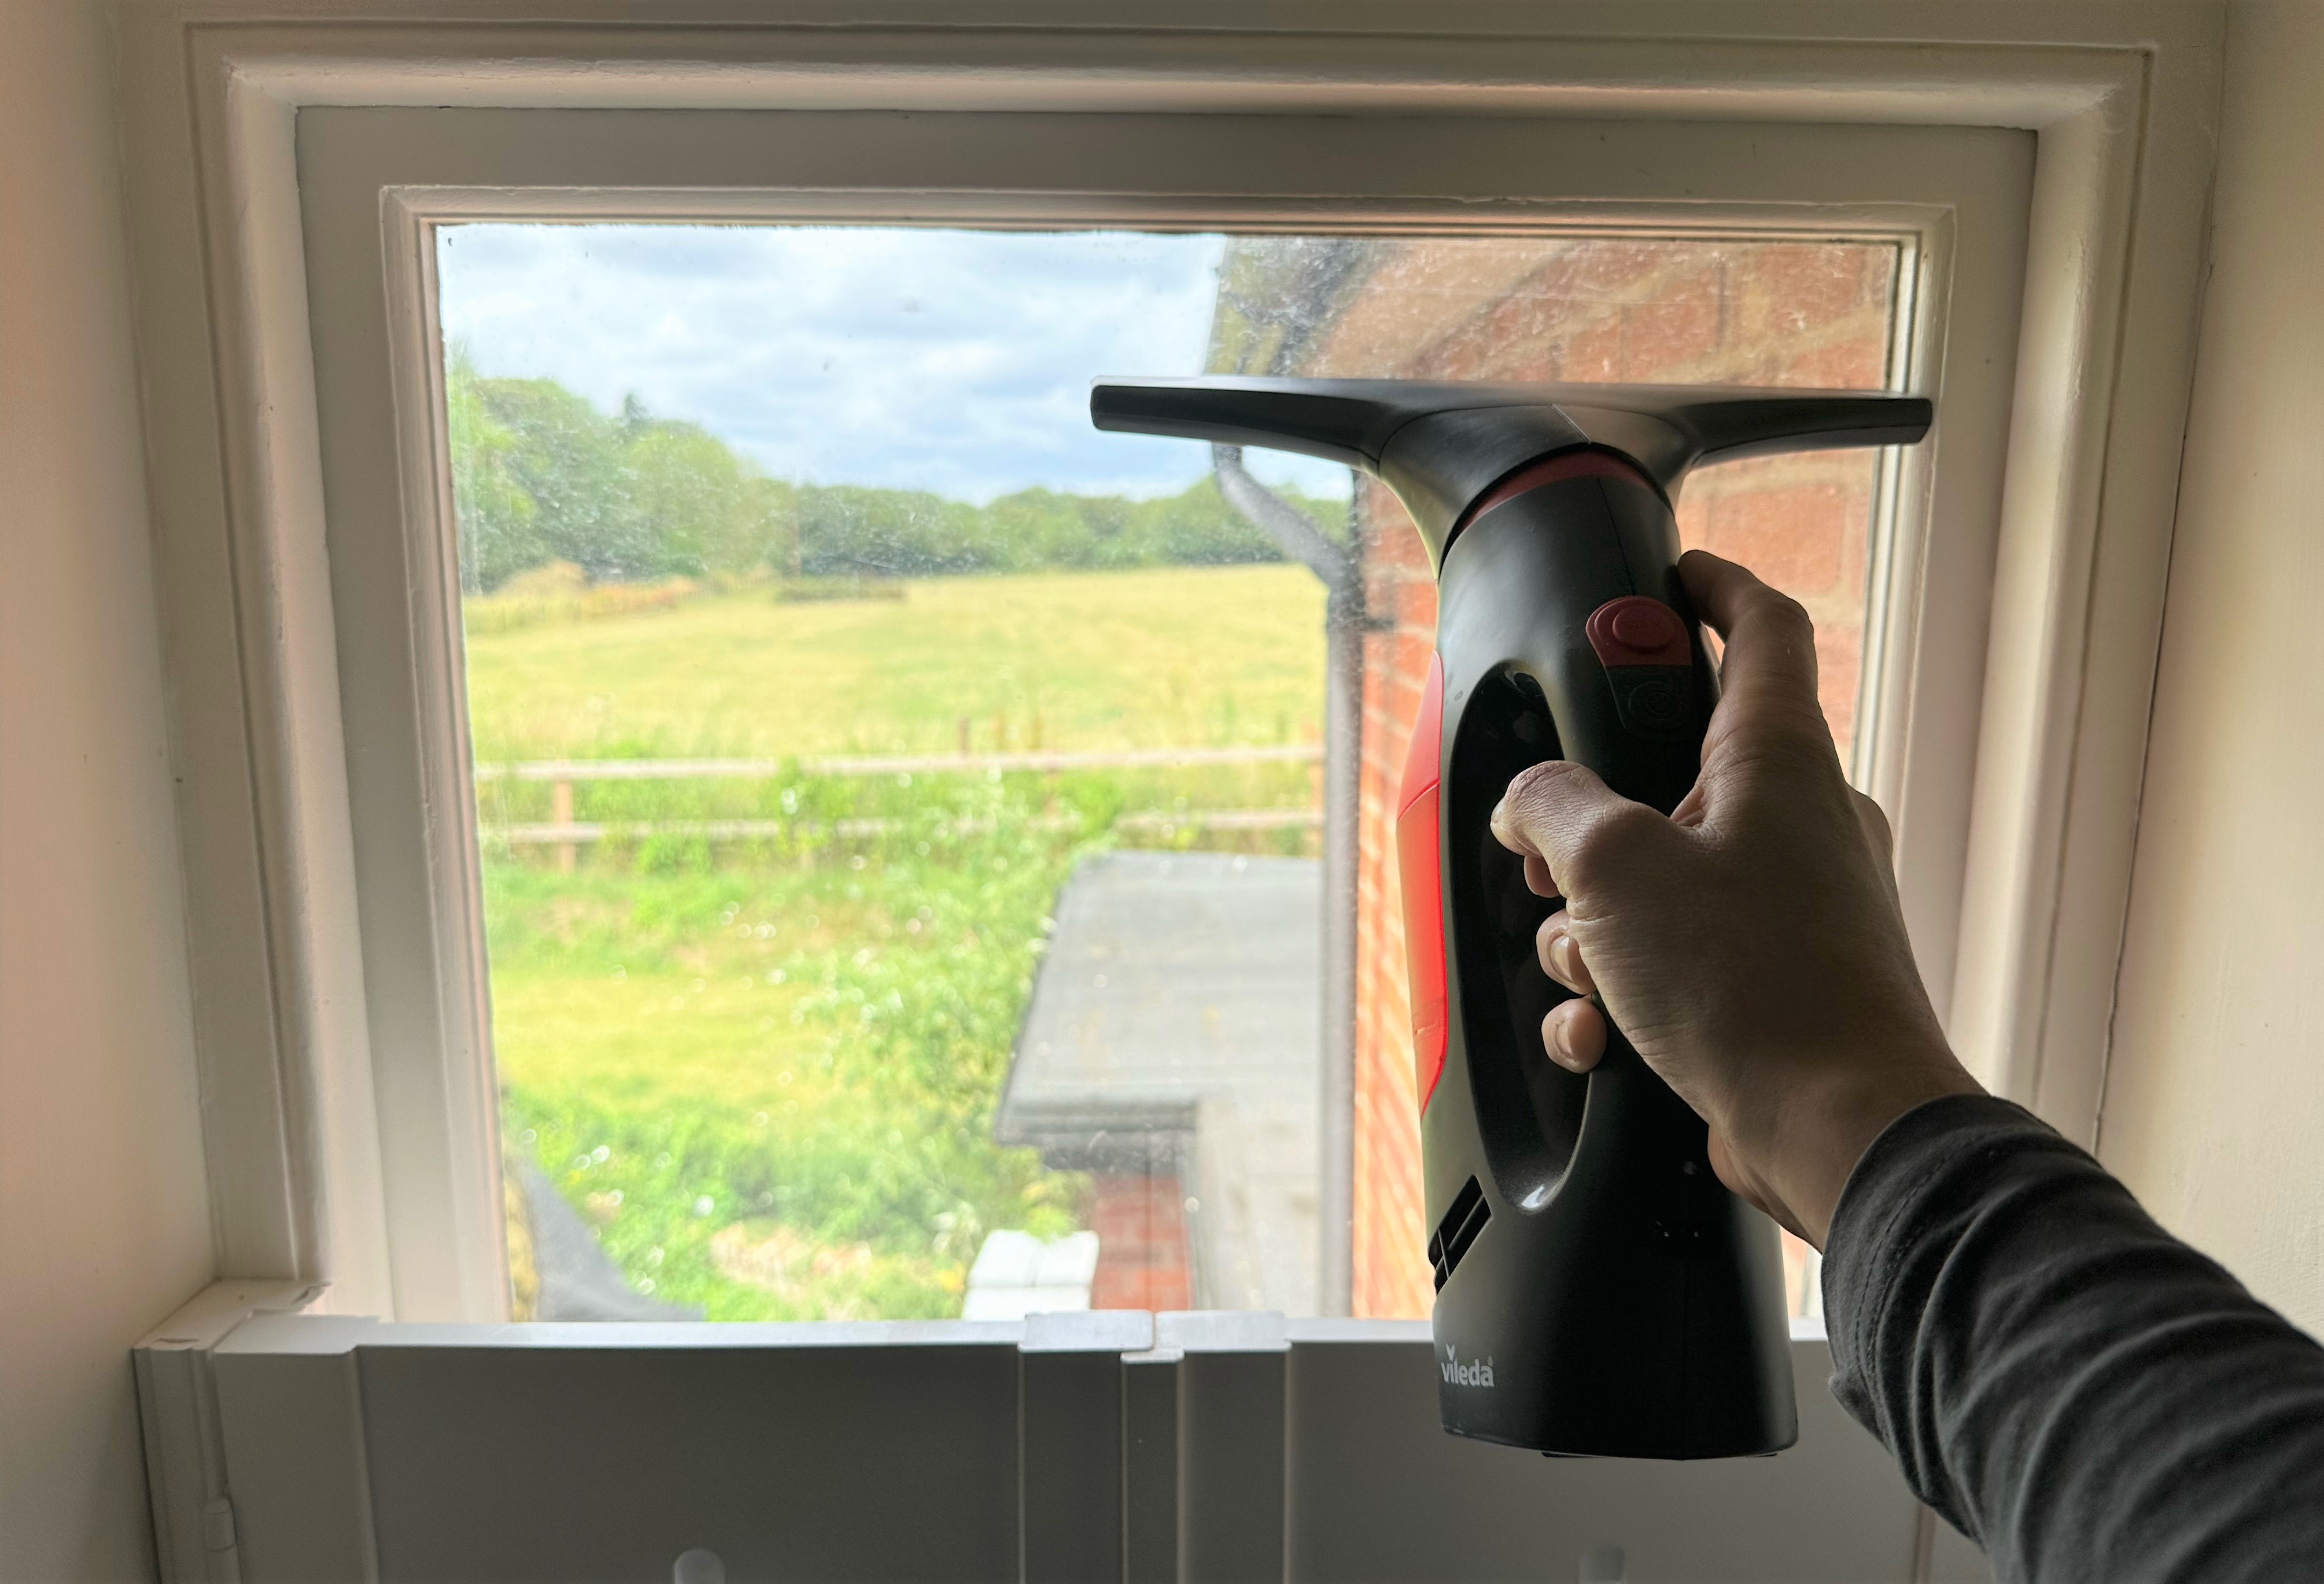 This window vacuum is my saviour for getting rid of condensation